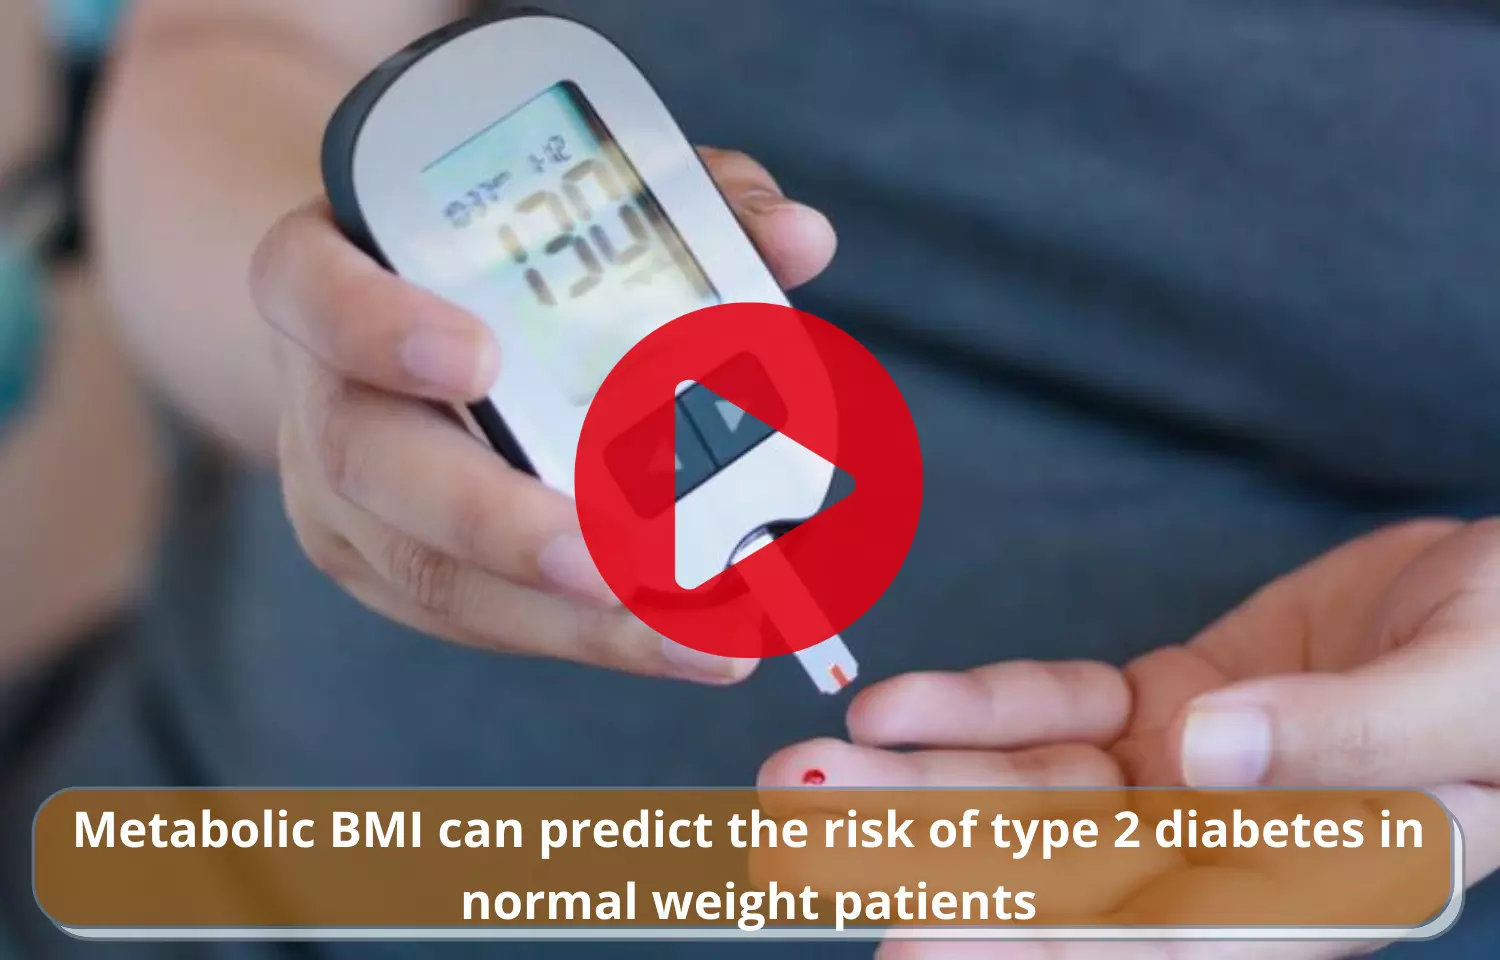 Metabolic BMI can predict the risk of type 2 diabetes in normal weight patients